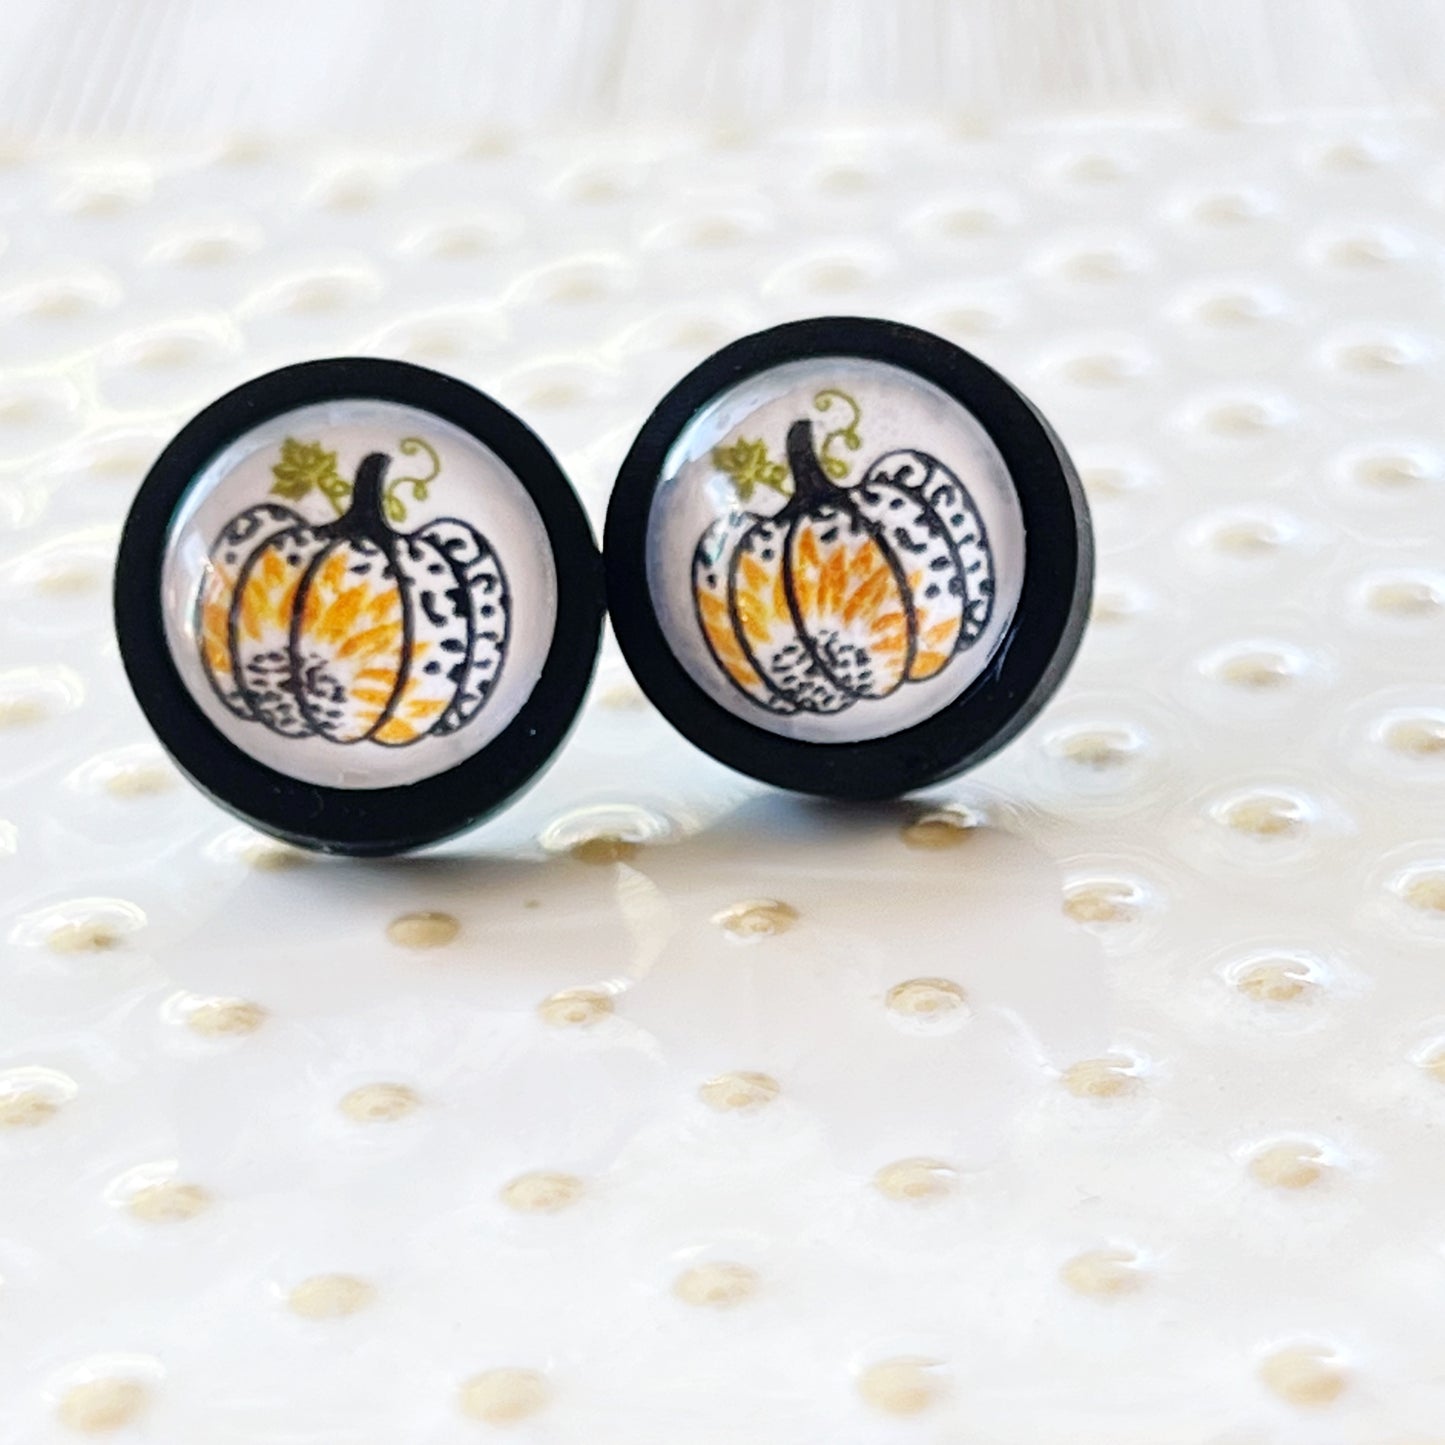 Pumpkin & Sunflower Black Wood Stud Earrings: Unique Autumnal Accents for Your Style